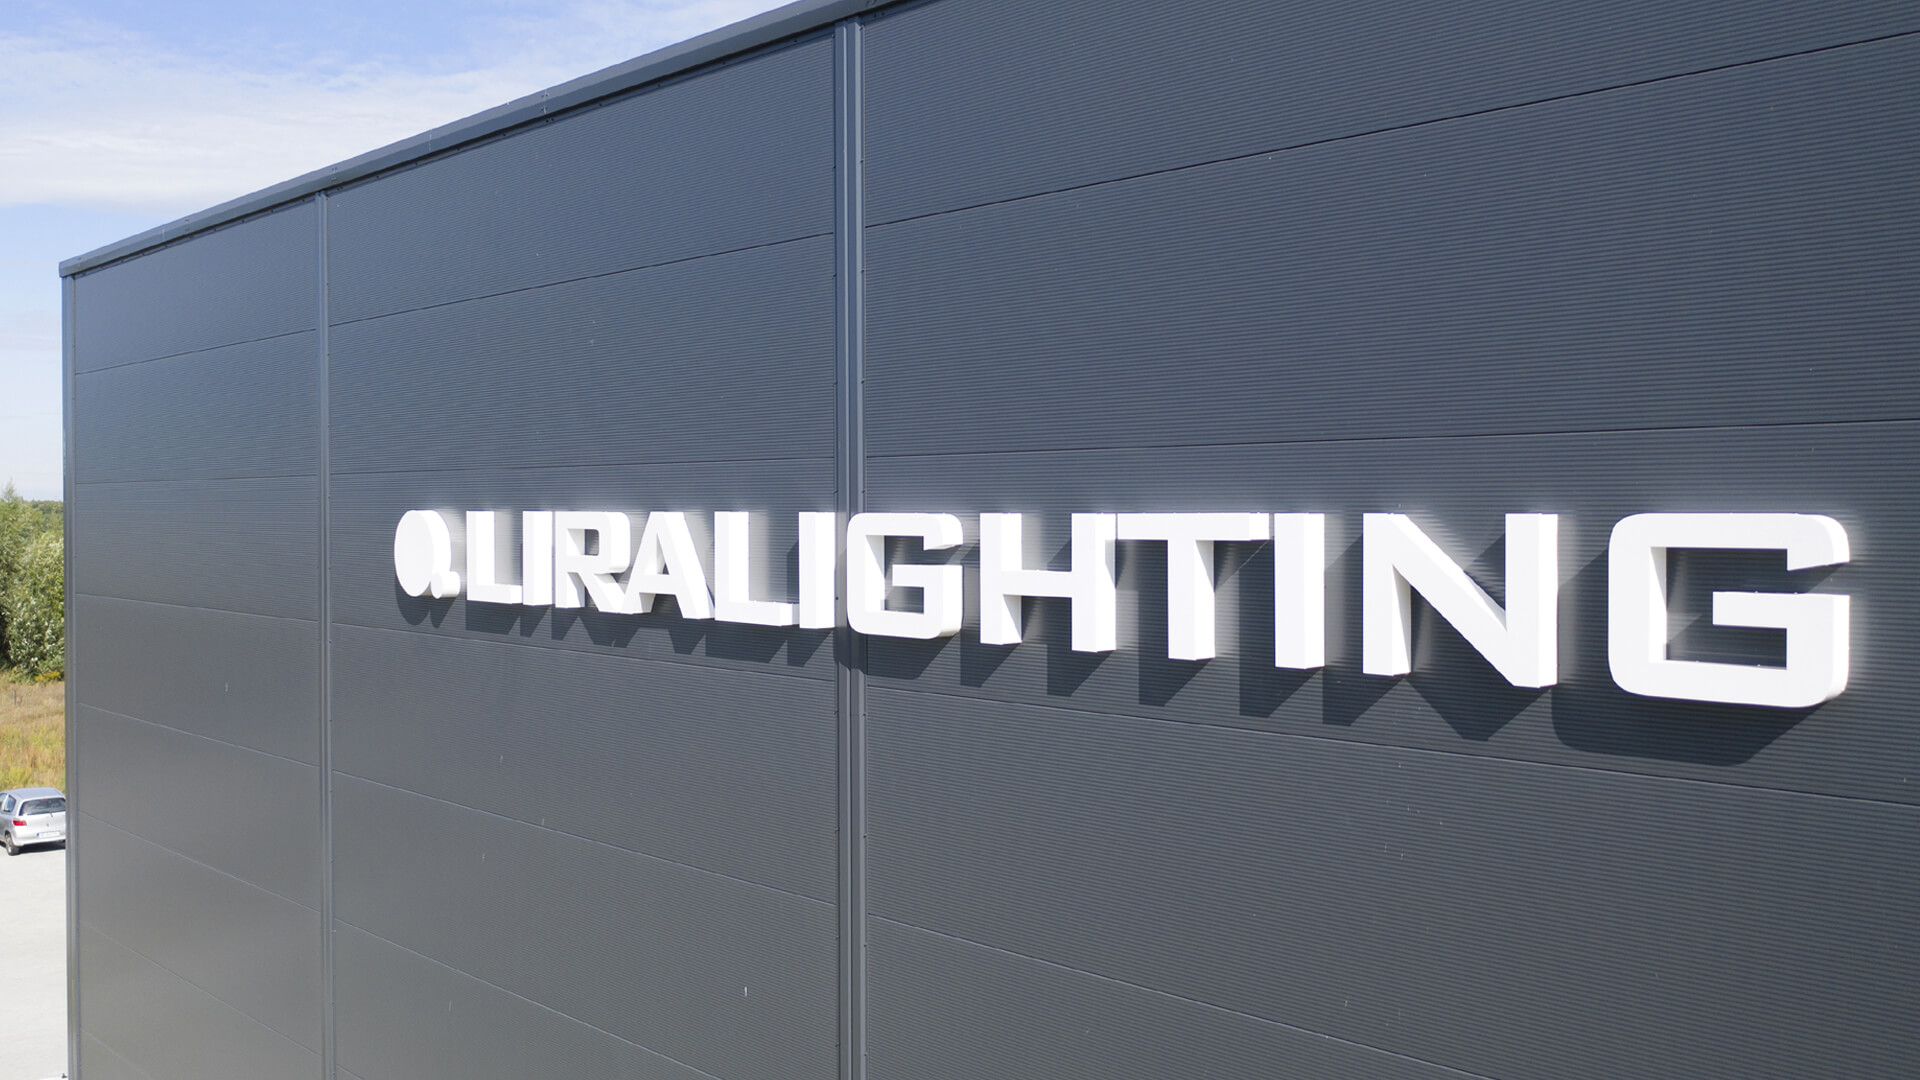 Illuminated letters Liralighting - 3D LED letters for industrial hall in white.